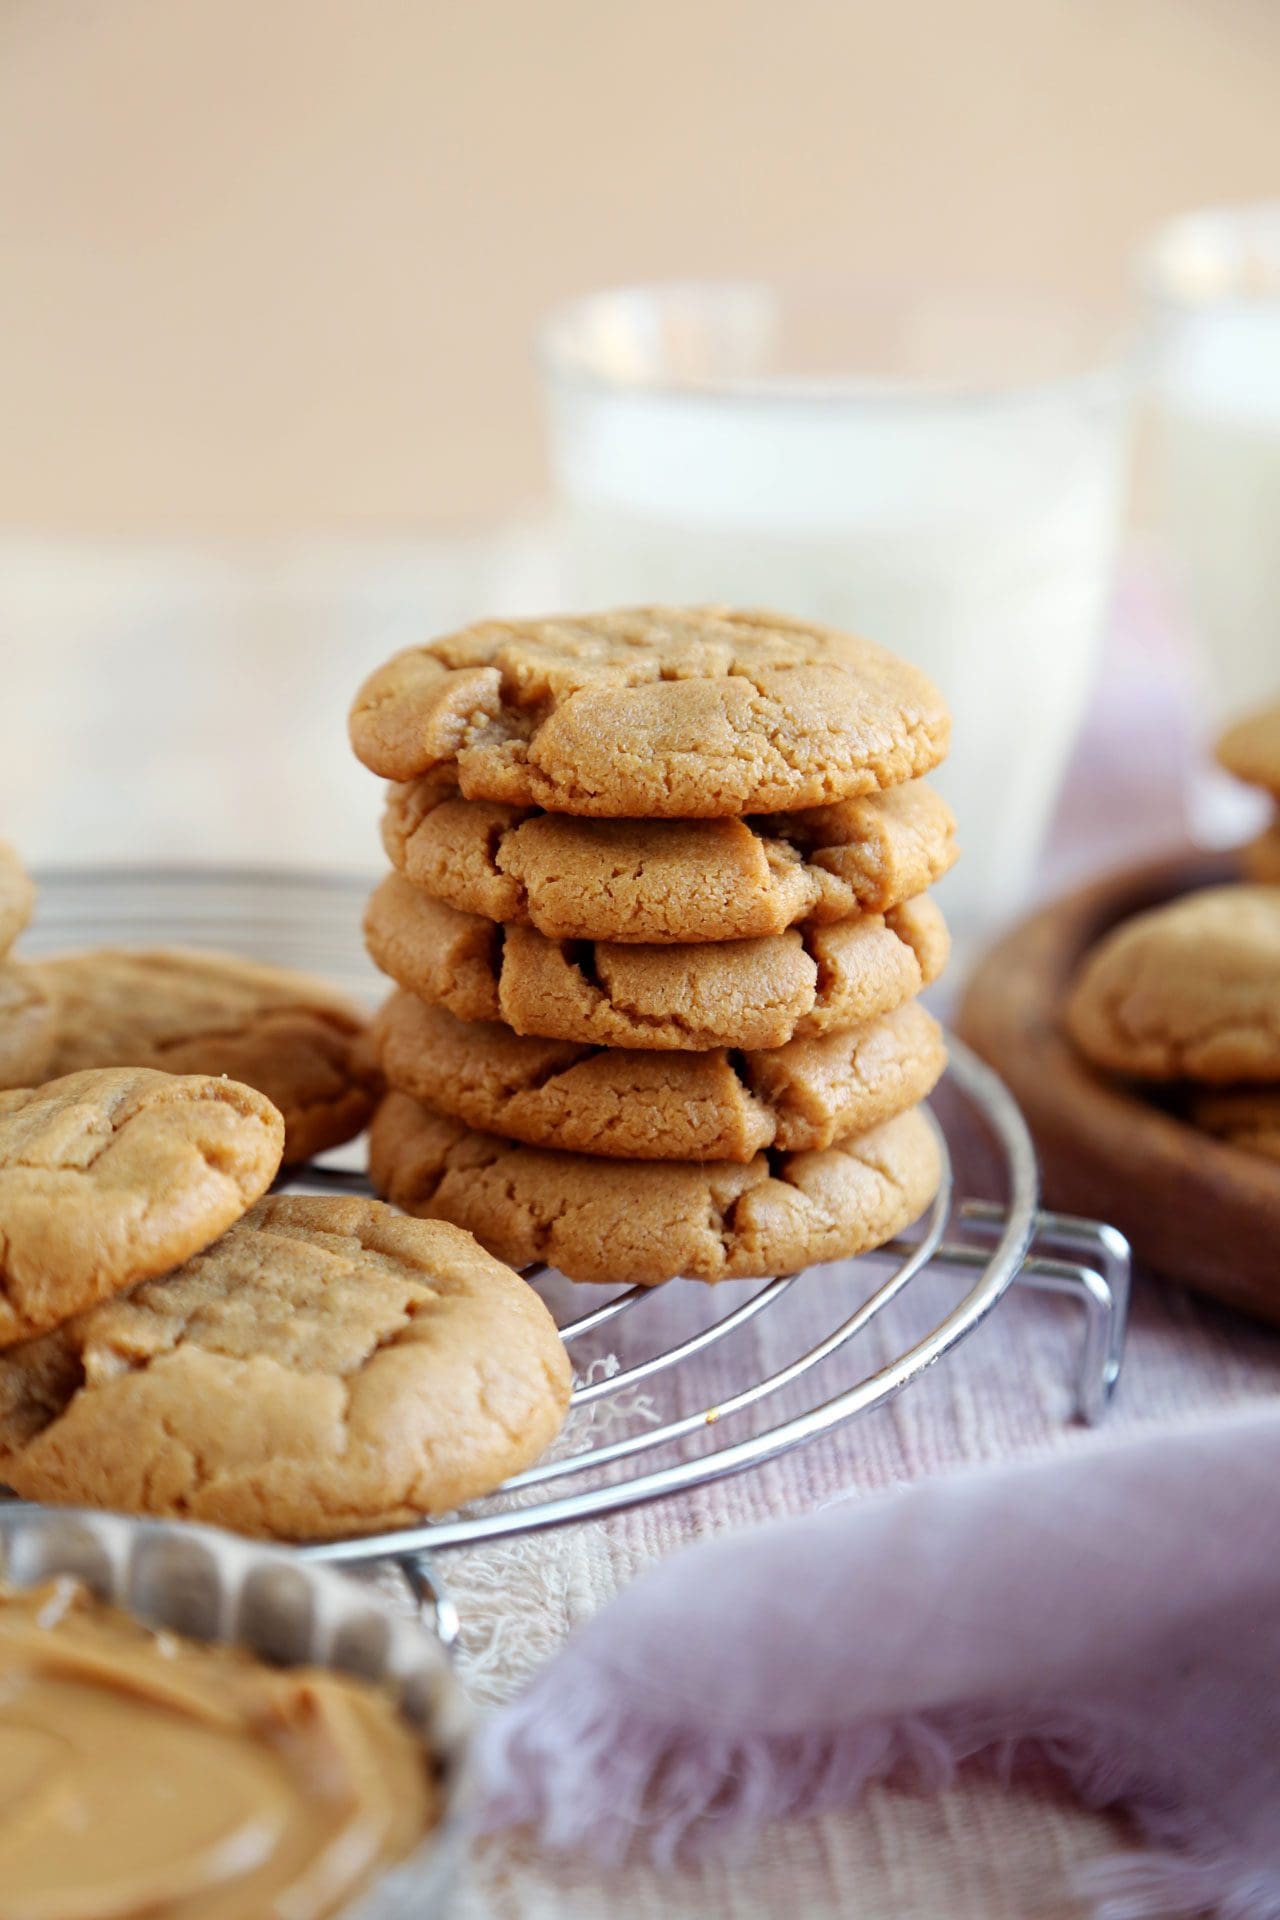 How to Keep Cookies Soft  Easy Baking Tips and Recipes: Cookies